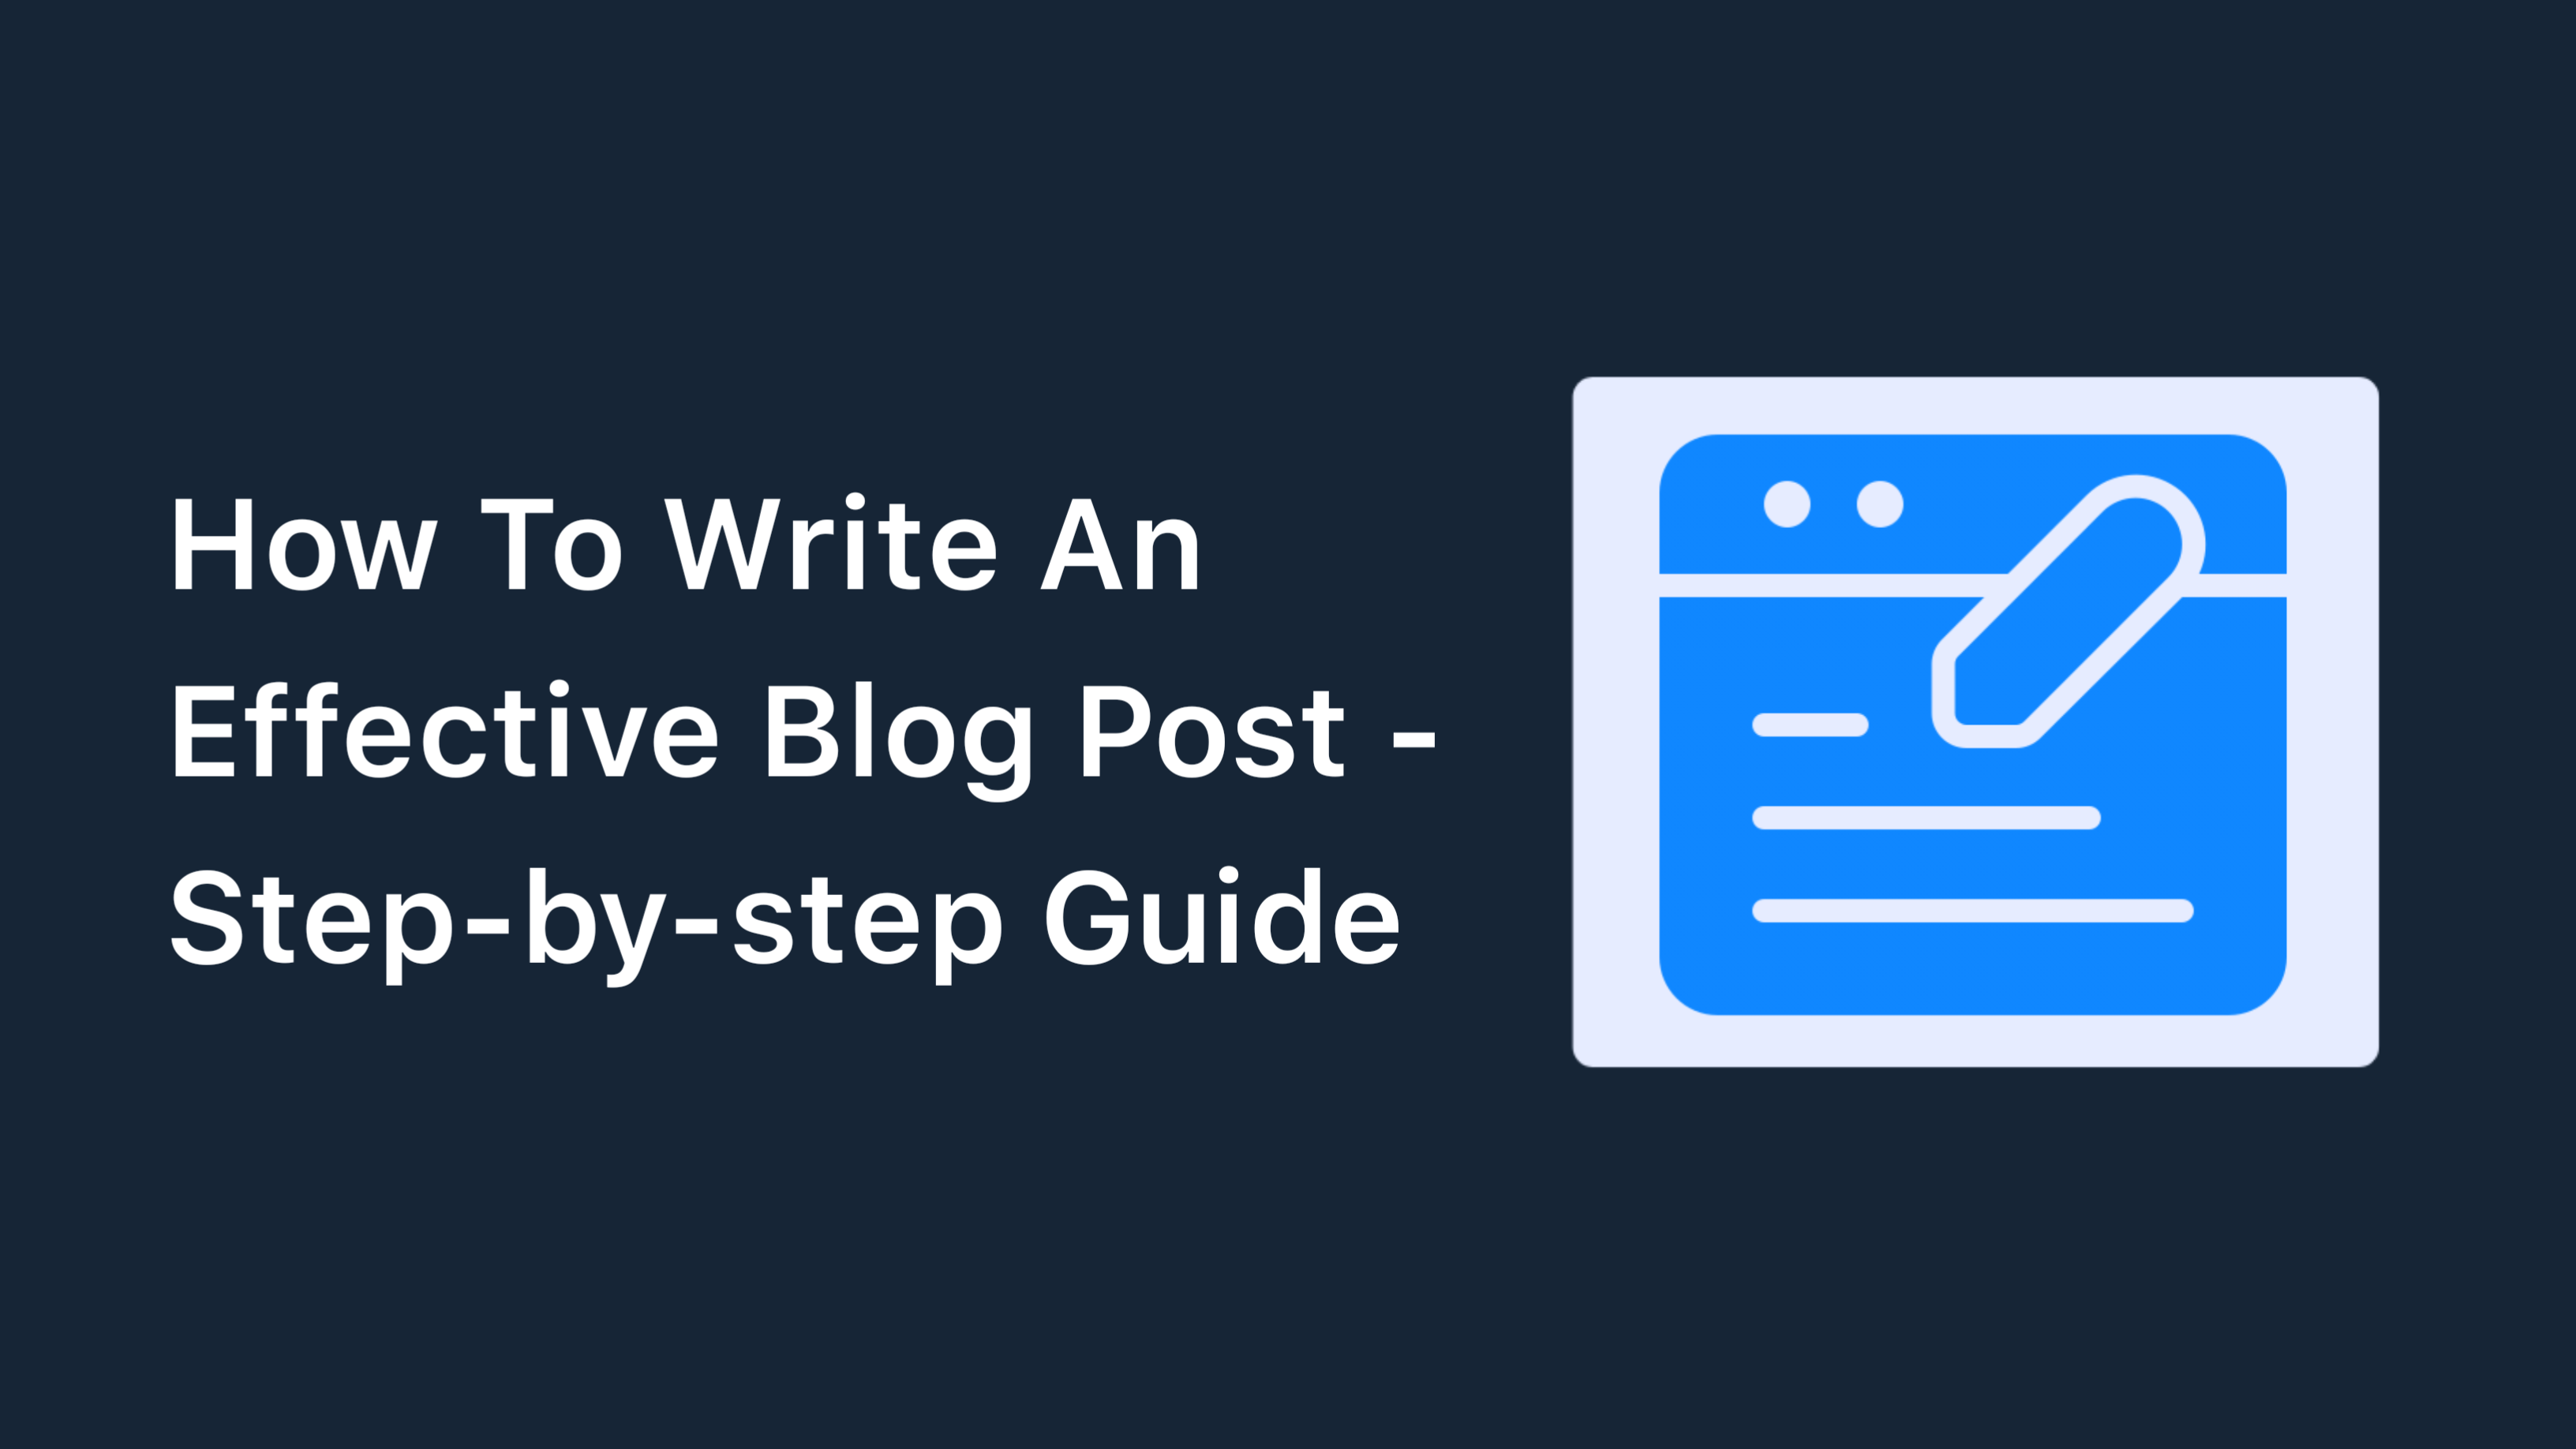 How To Write A Blog Post - Step-by-step Guide